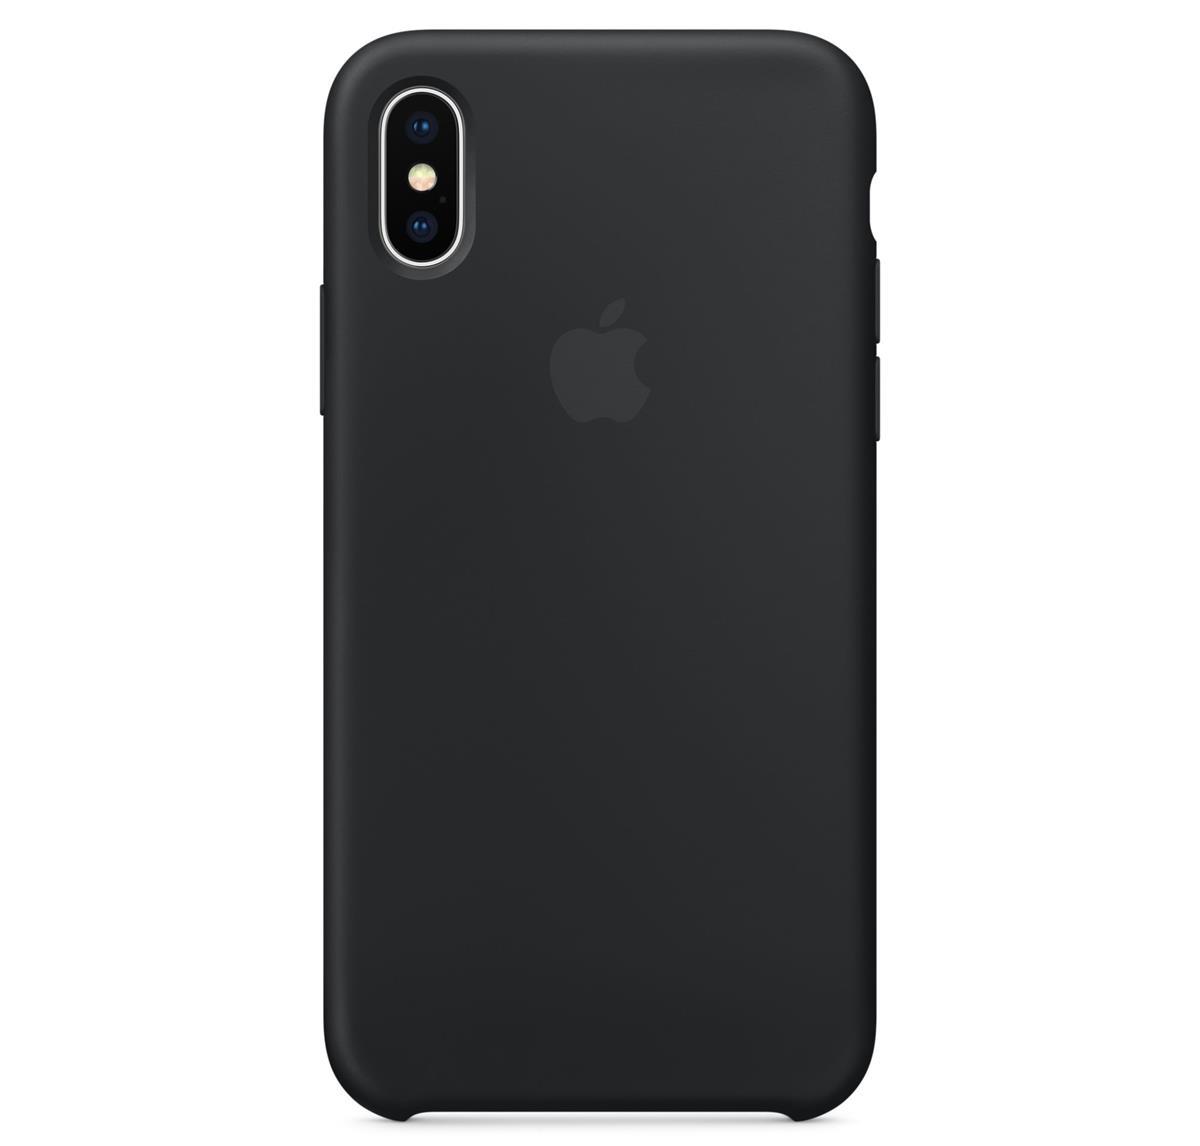 Official Apple iPhone X Silicone Case for $9.99 Shipped